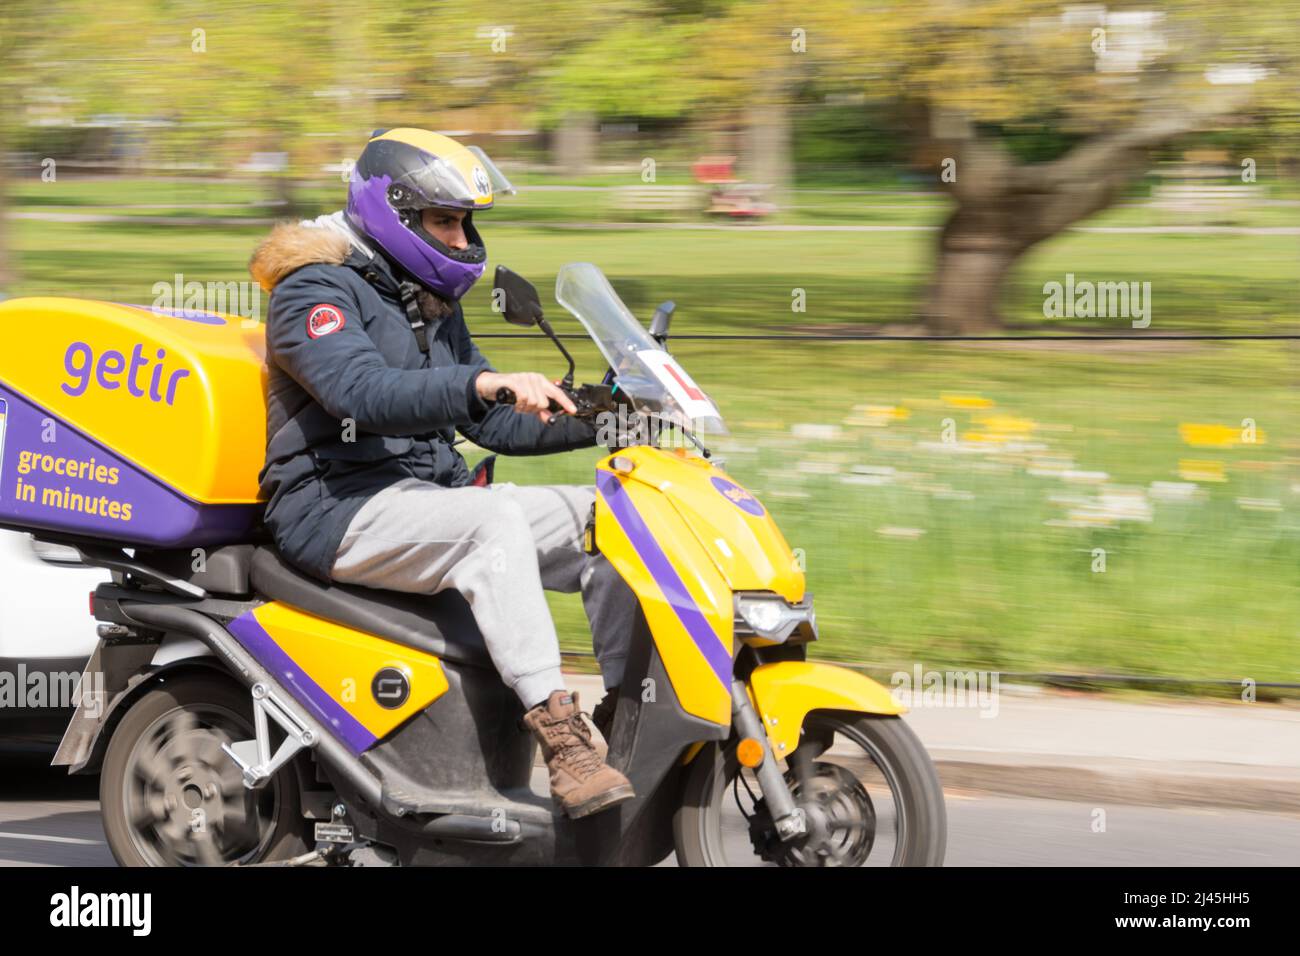 Getir ultrafast delivery driver delivering groceries on an e-scooter Stock Photo